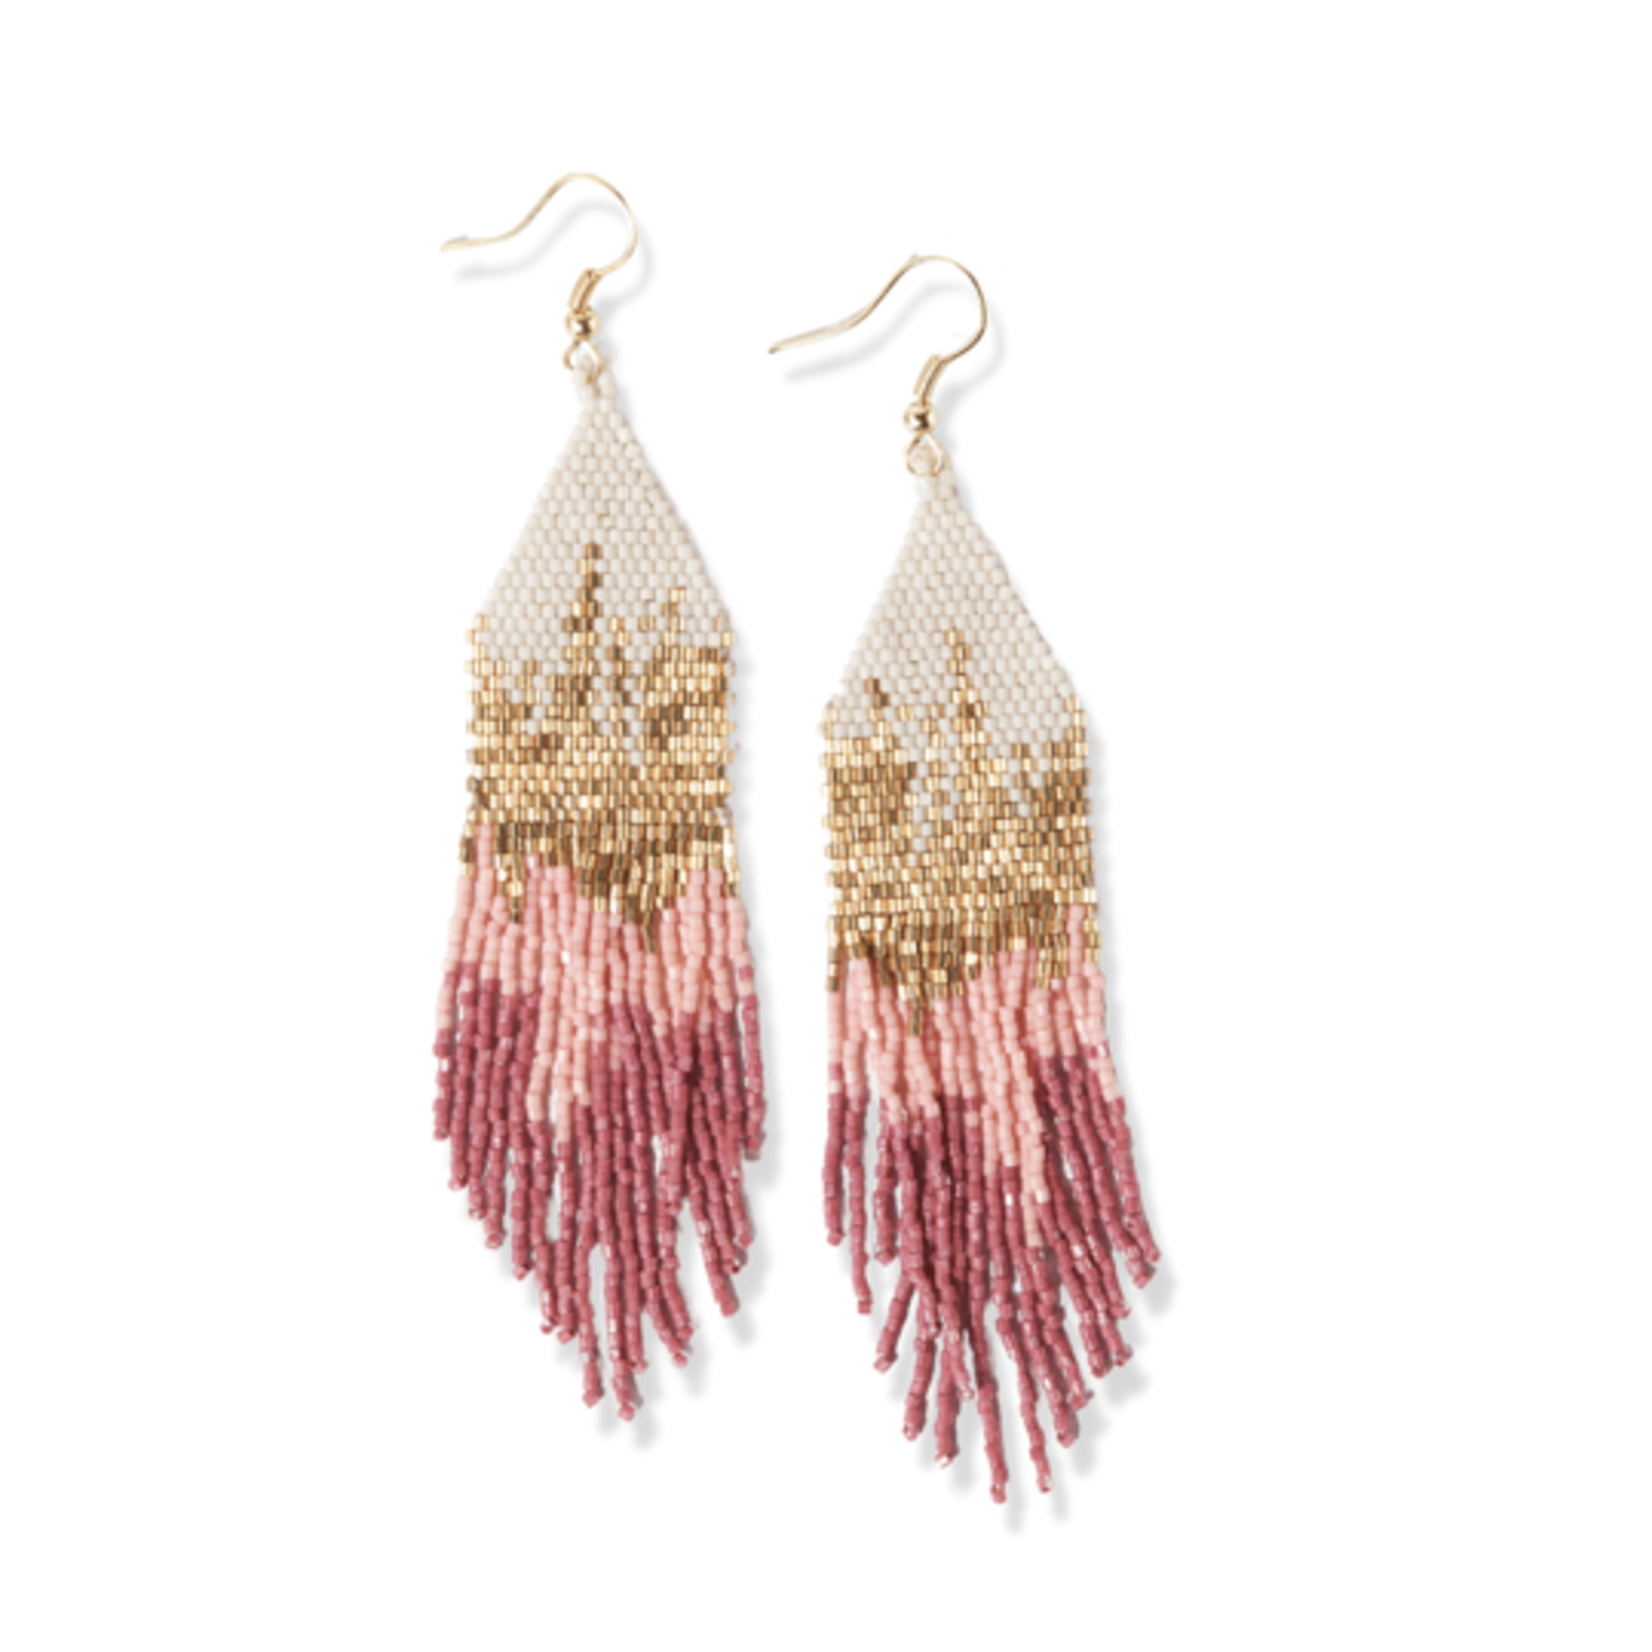 INK + ALLOY Pink Terracotta Mixed Metallic Luxe Ombre Earring 4.25"